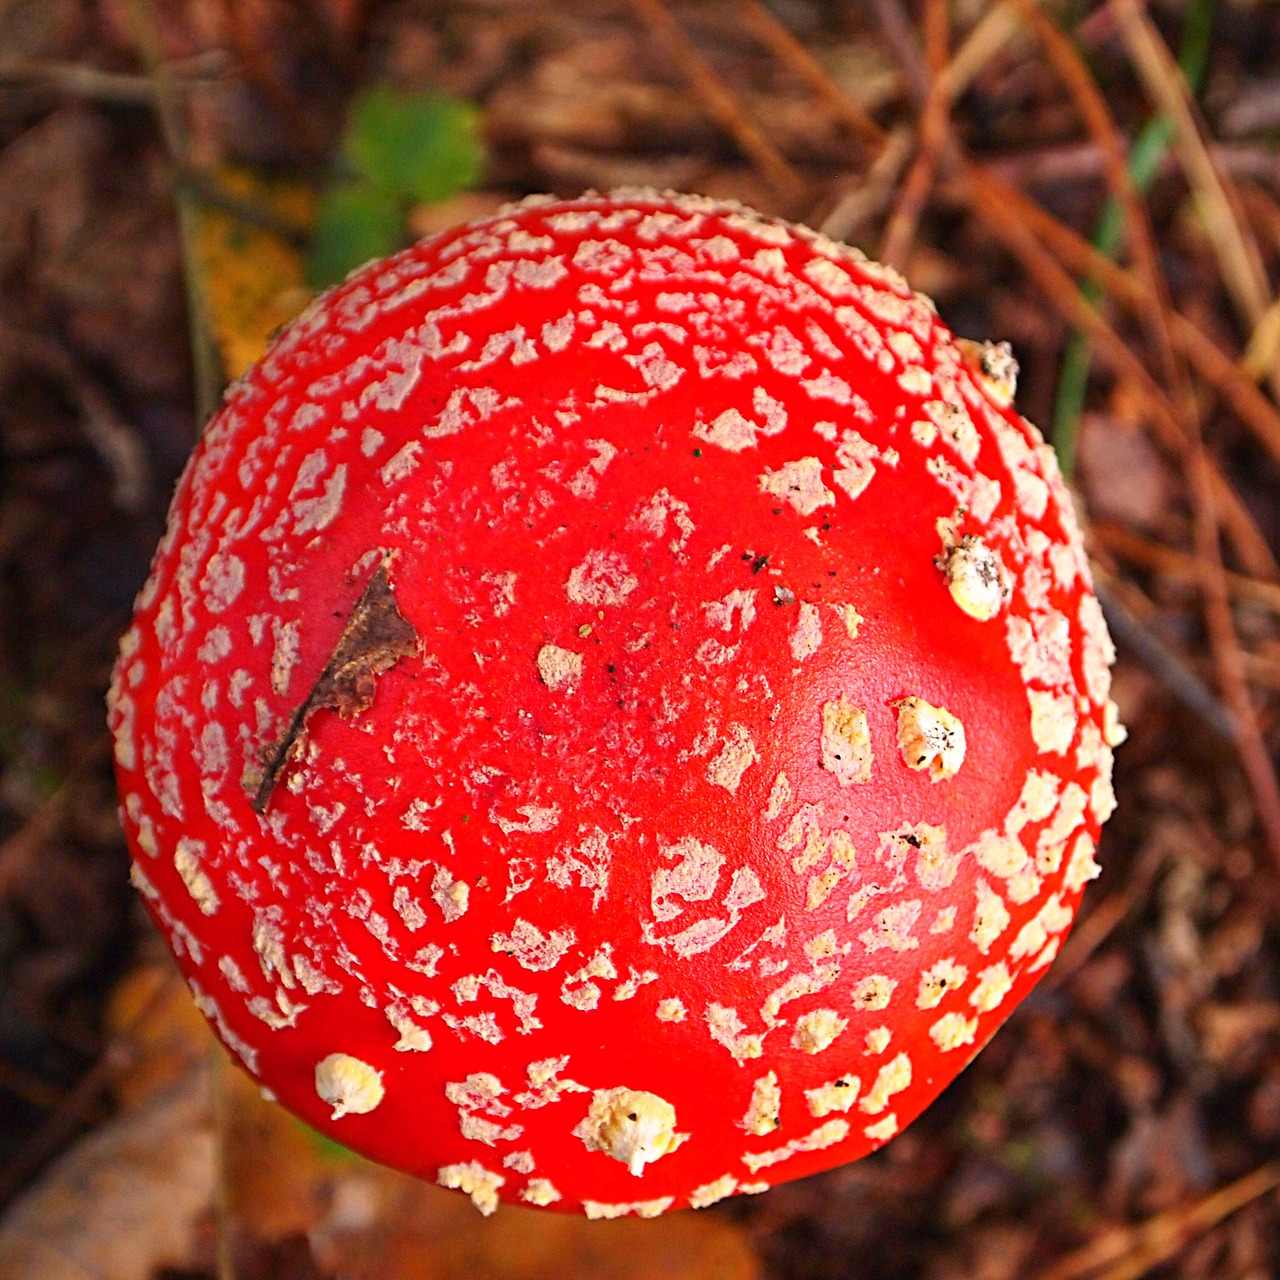 mushroom top view red with white dots free photo